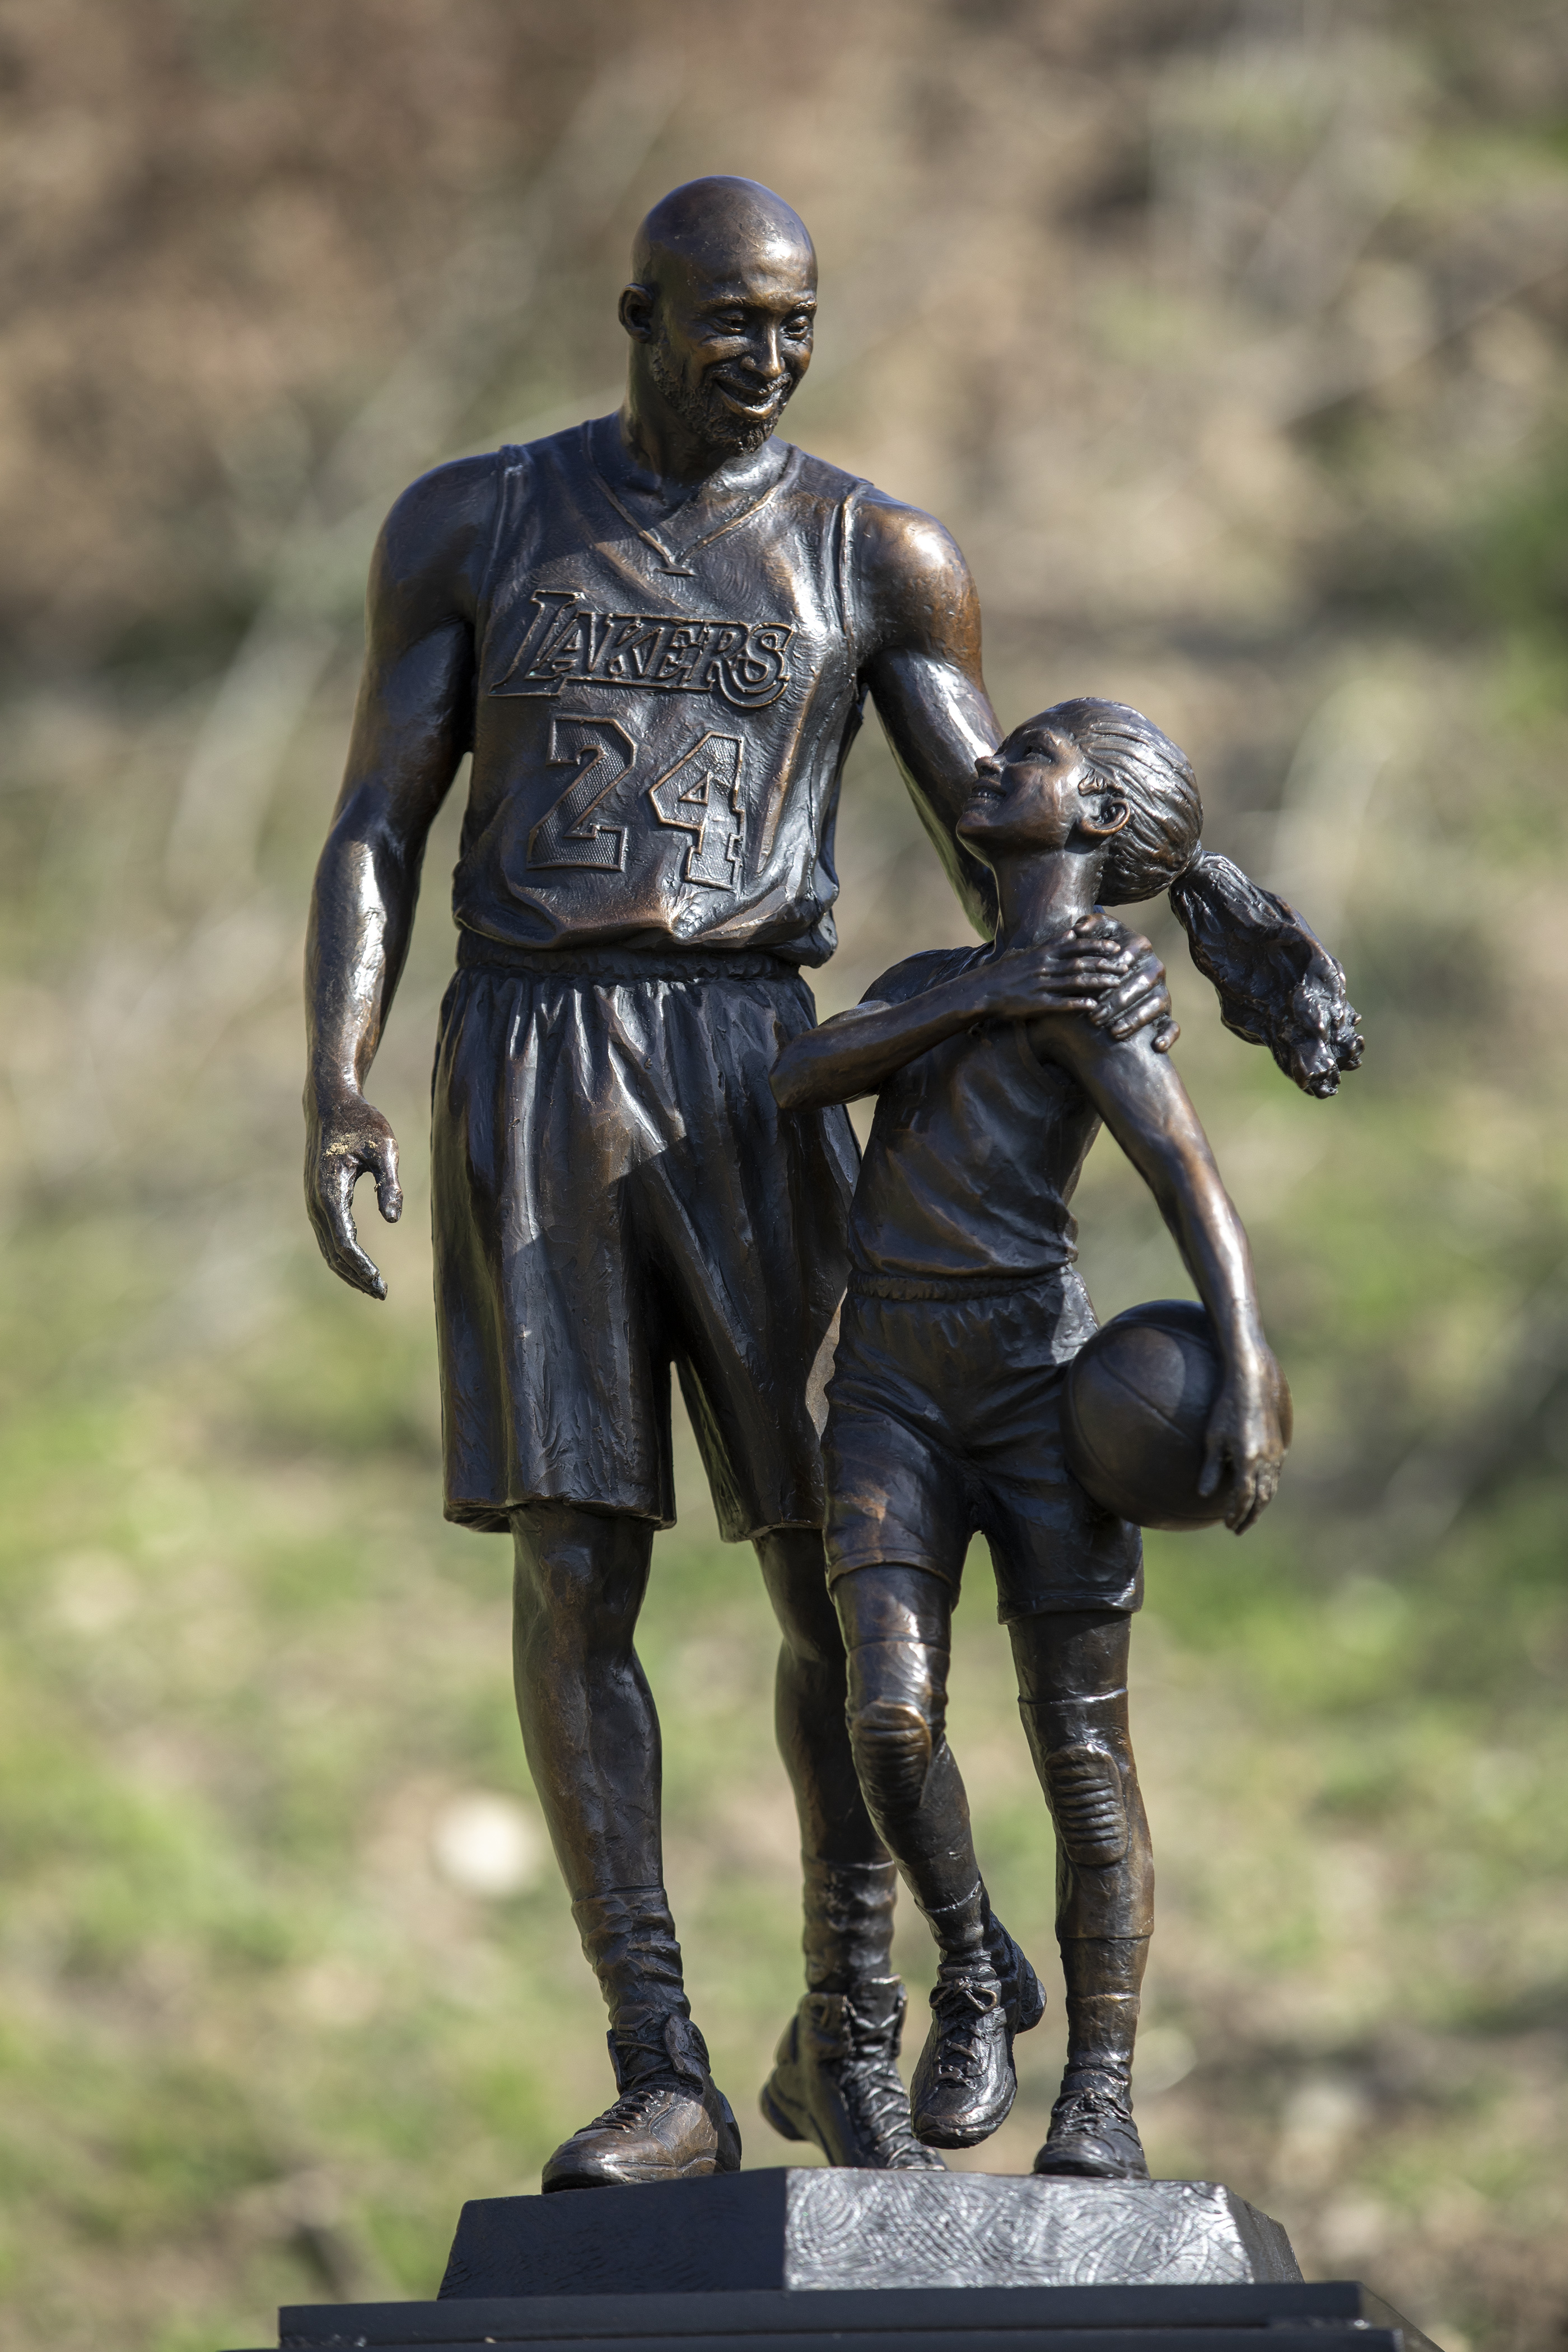 Kobe Byran and Gianna Bryants bronze statue in California | Source: Getty Images